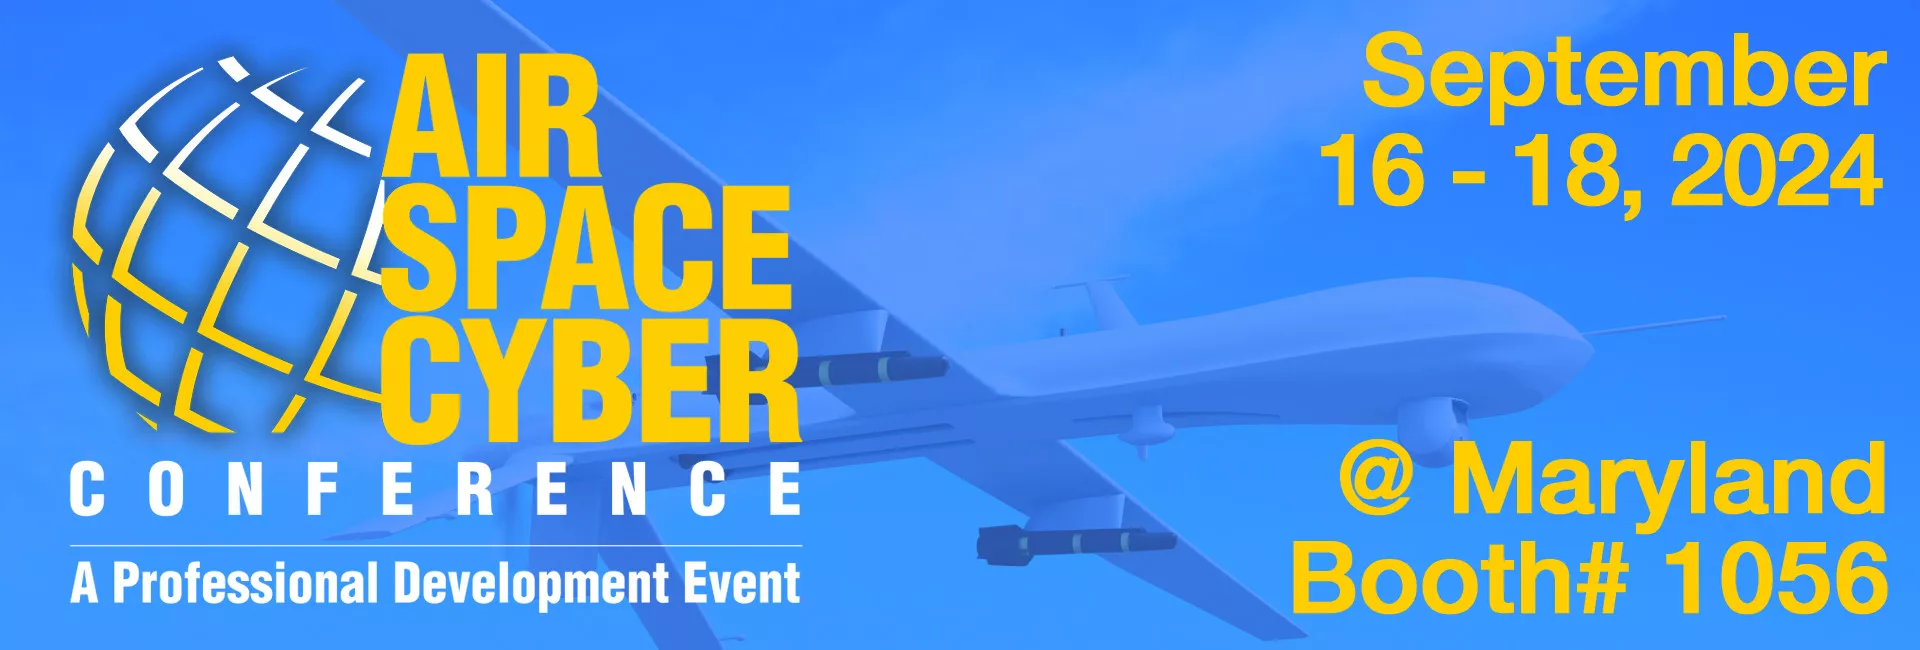 Air Space Cyber Conference 2024 banner